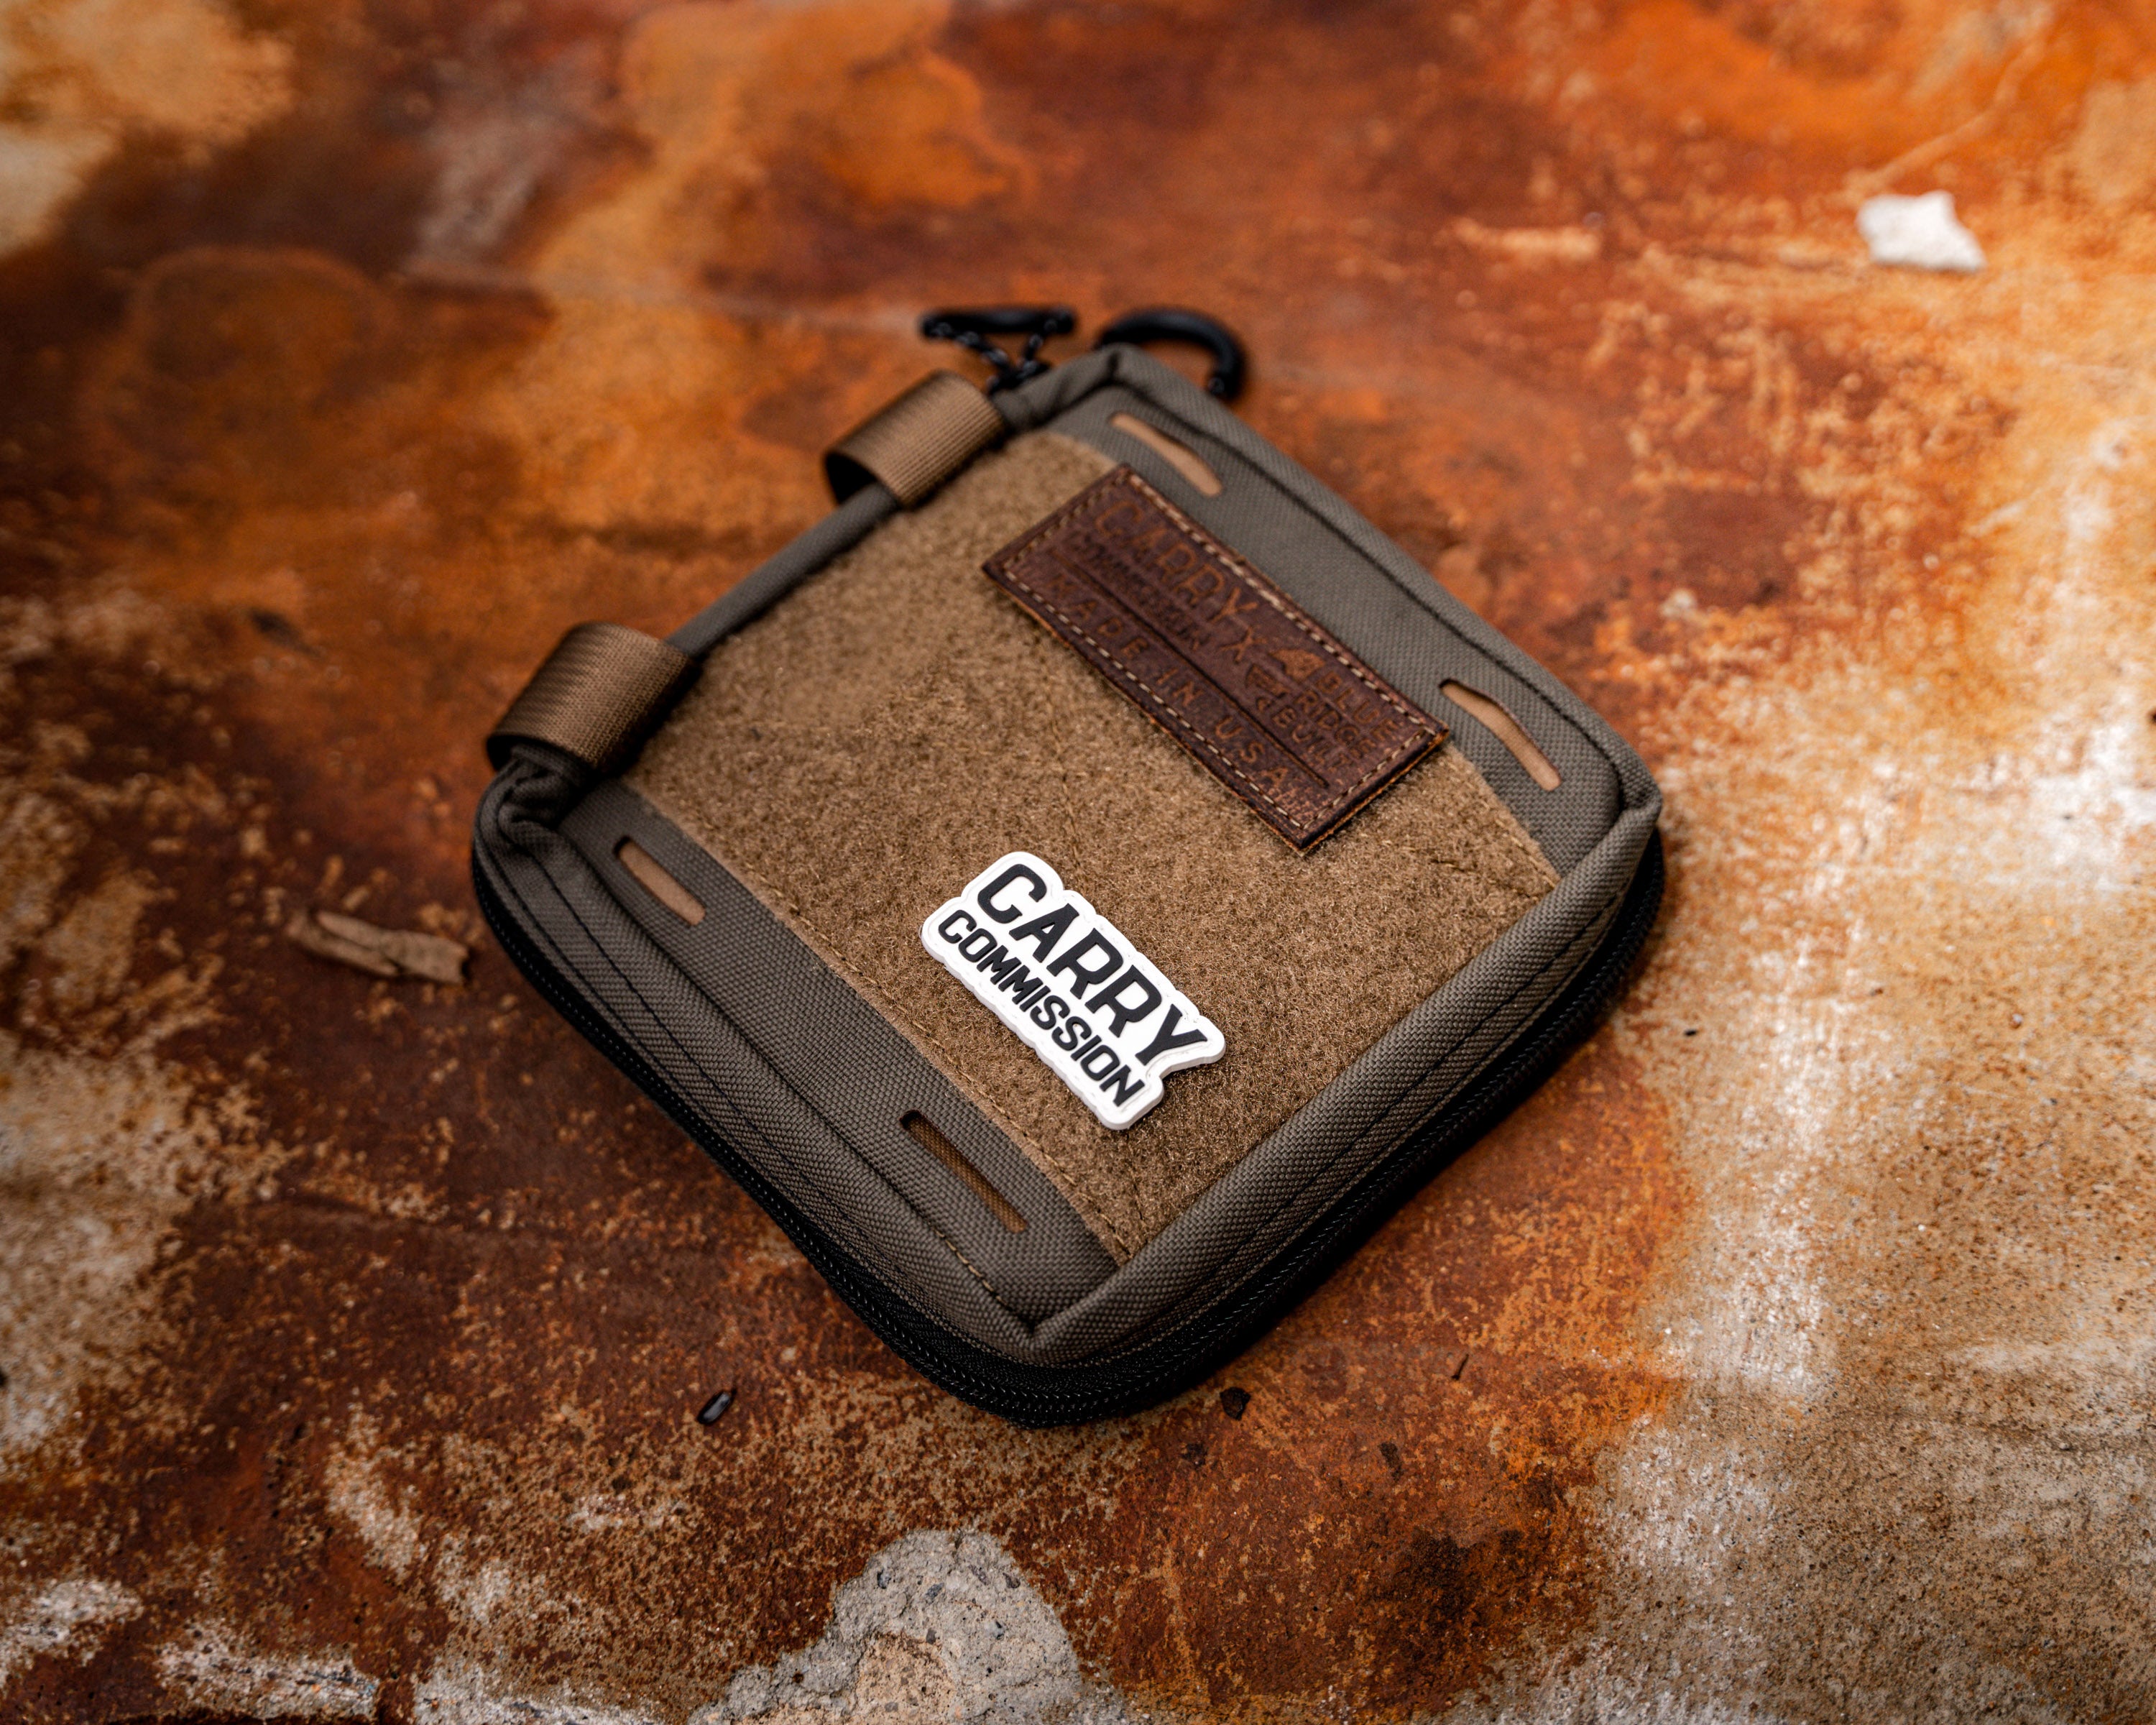 Carry Commission / Blue Ridge Overland Gear EDC Pouch Bundle overhead sideways front view sitting on rusting metal backdrop